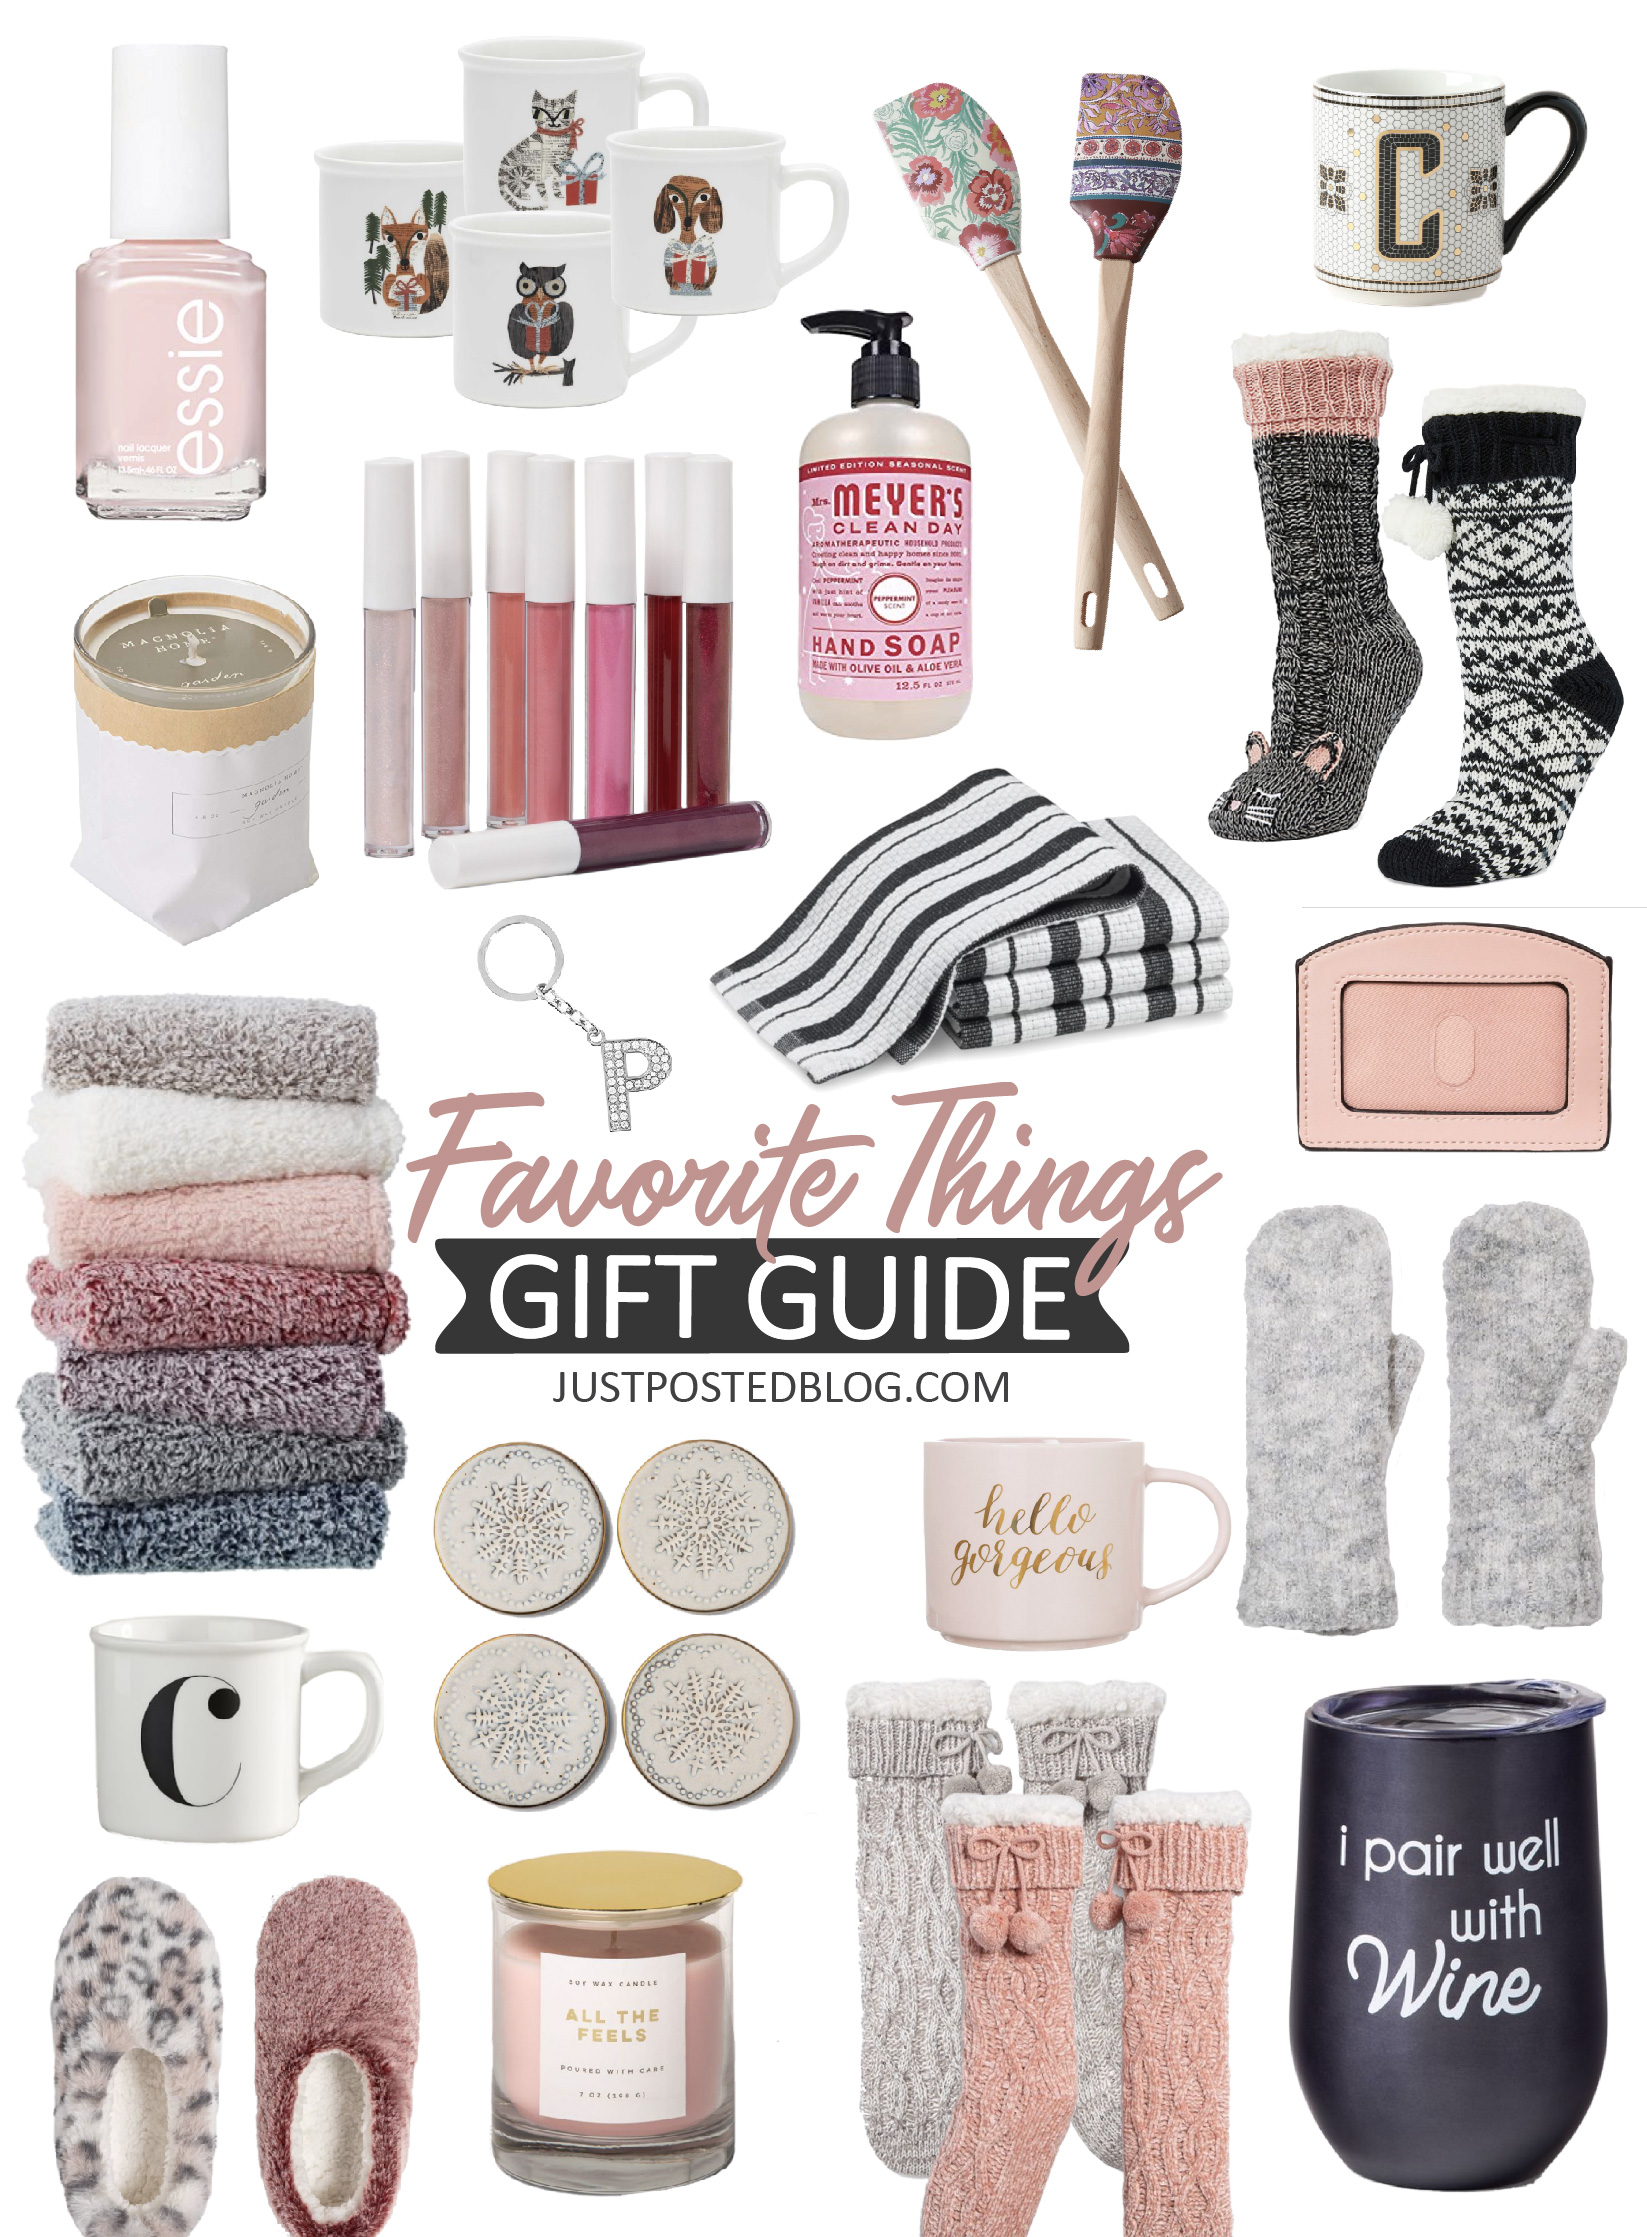 28 Gifts under $25: What I Would Bring to a Favorite Things Party